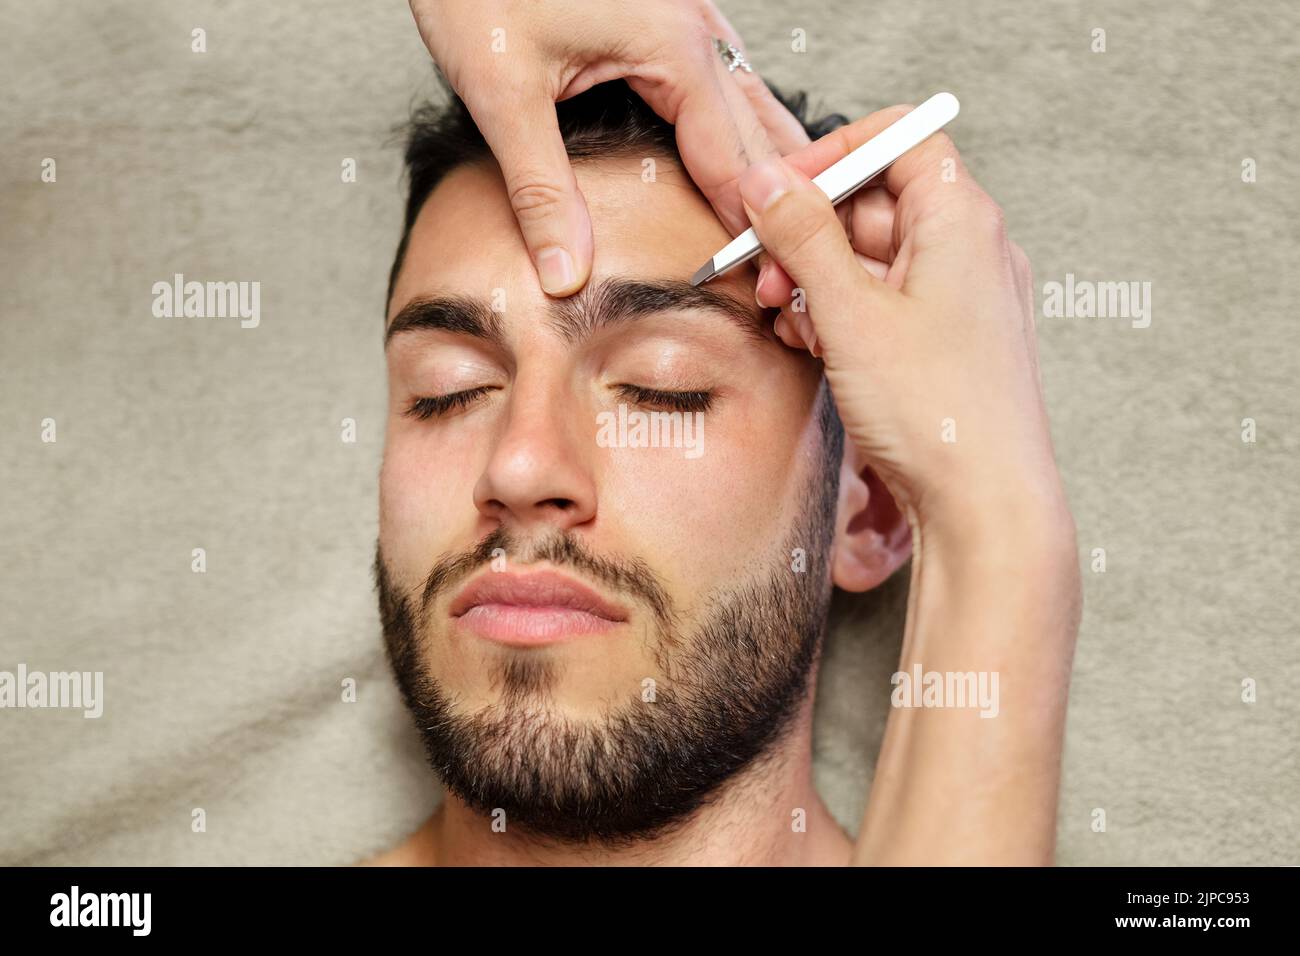 Top view of anonymous female cosmetician using tweezers to pluck eyebrow hair of calm young male client during work in beauty studio Stock Photo